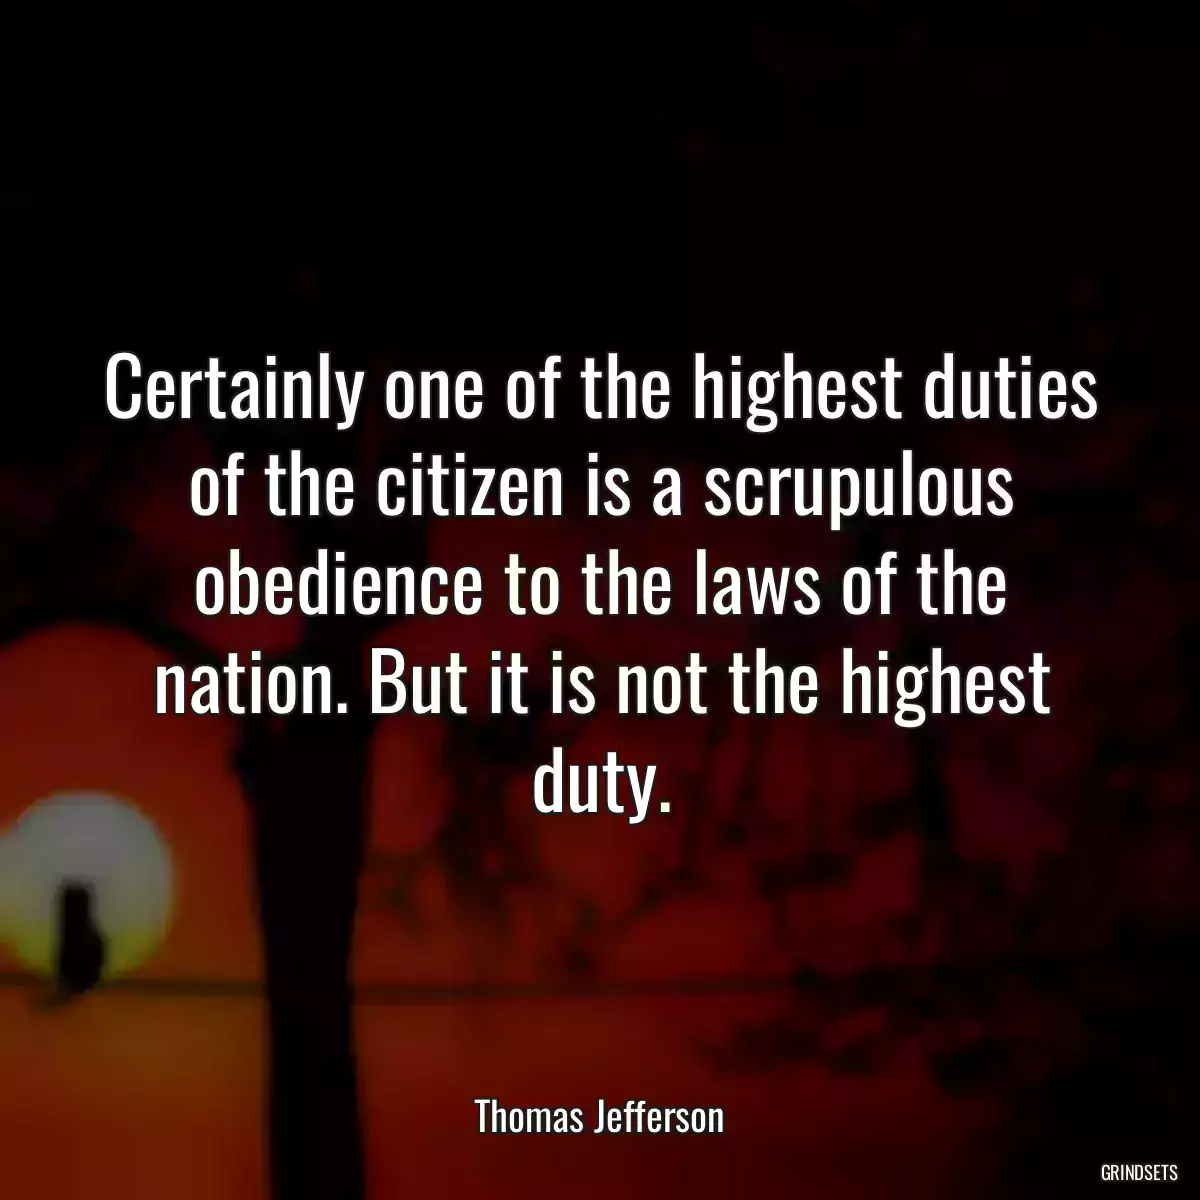 Certainly one of the highest duties of the citizen is a scrupulous obedience to the laws of the nation. But it is not the highest duty.